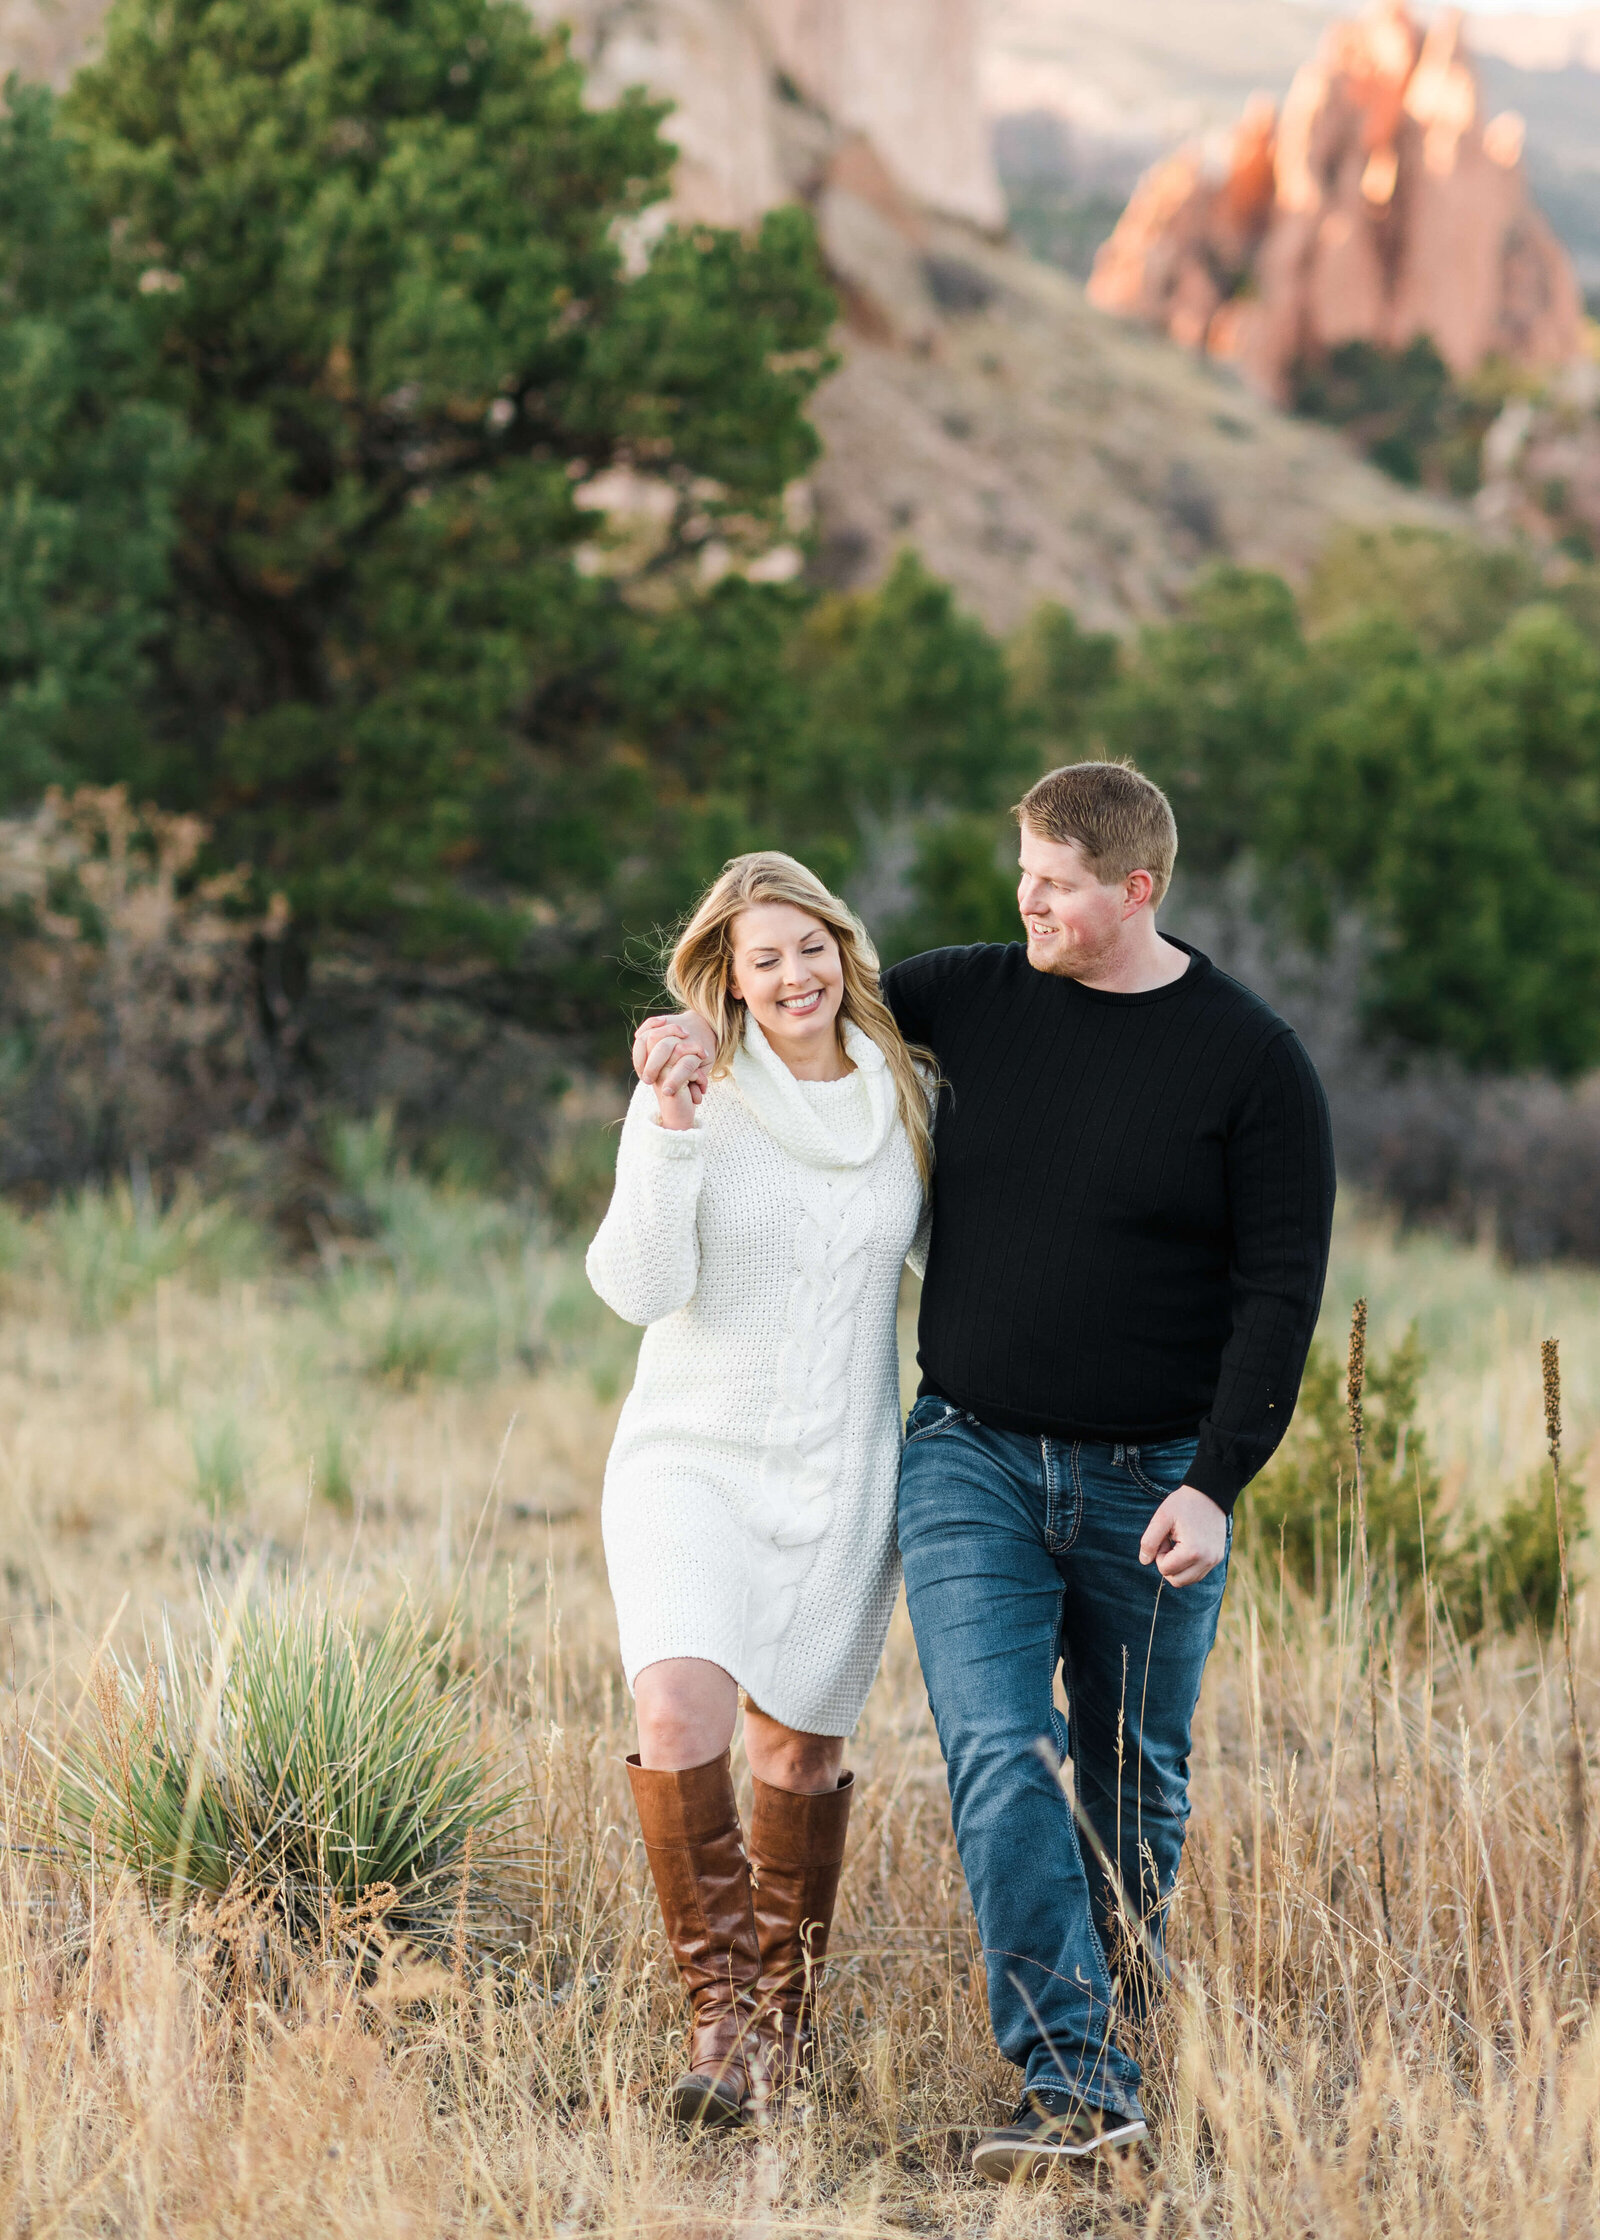 Couple walking together during engagement session by Denver Wedding Photographer Erin Winter Photography